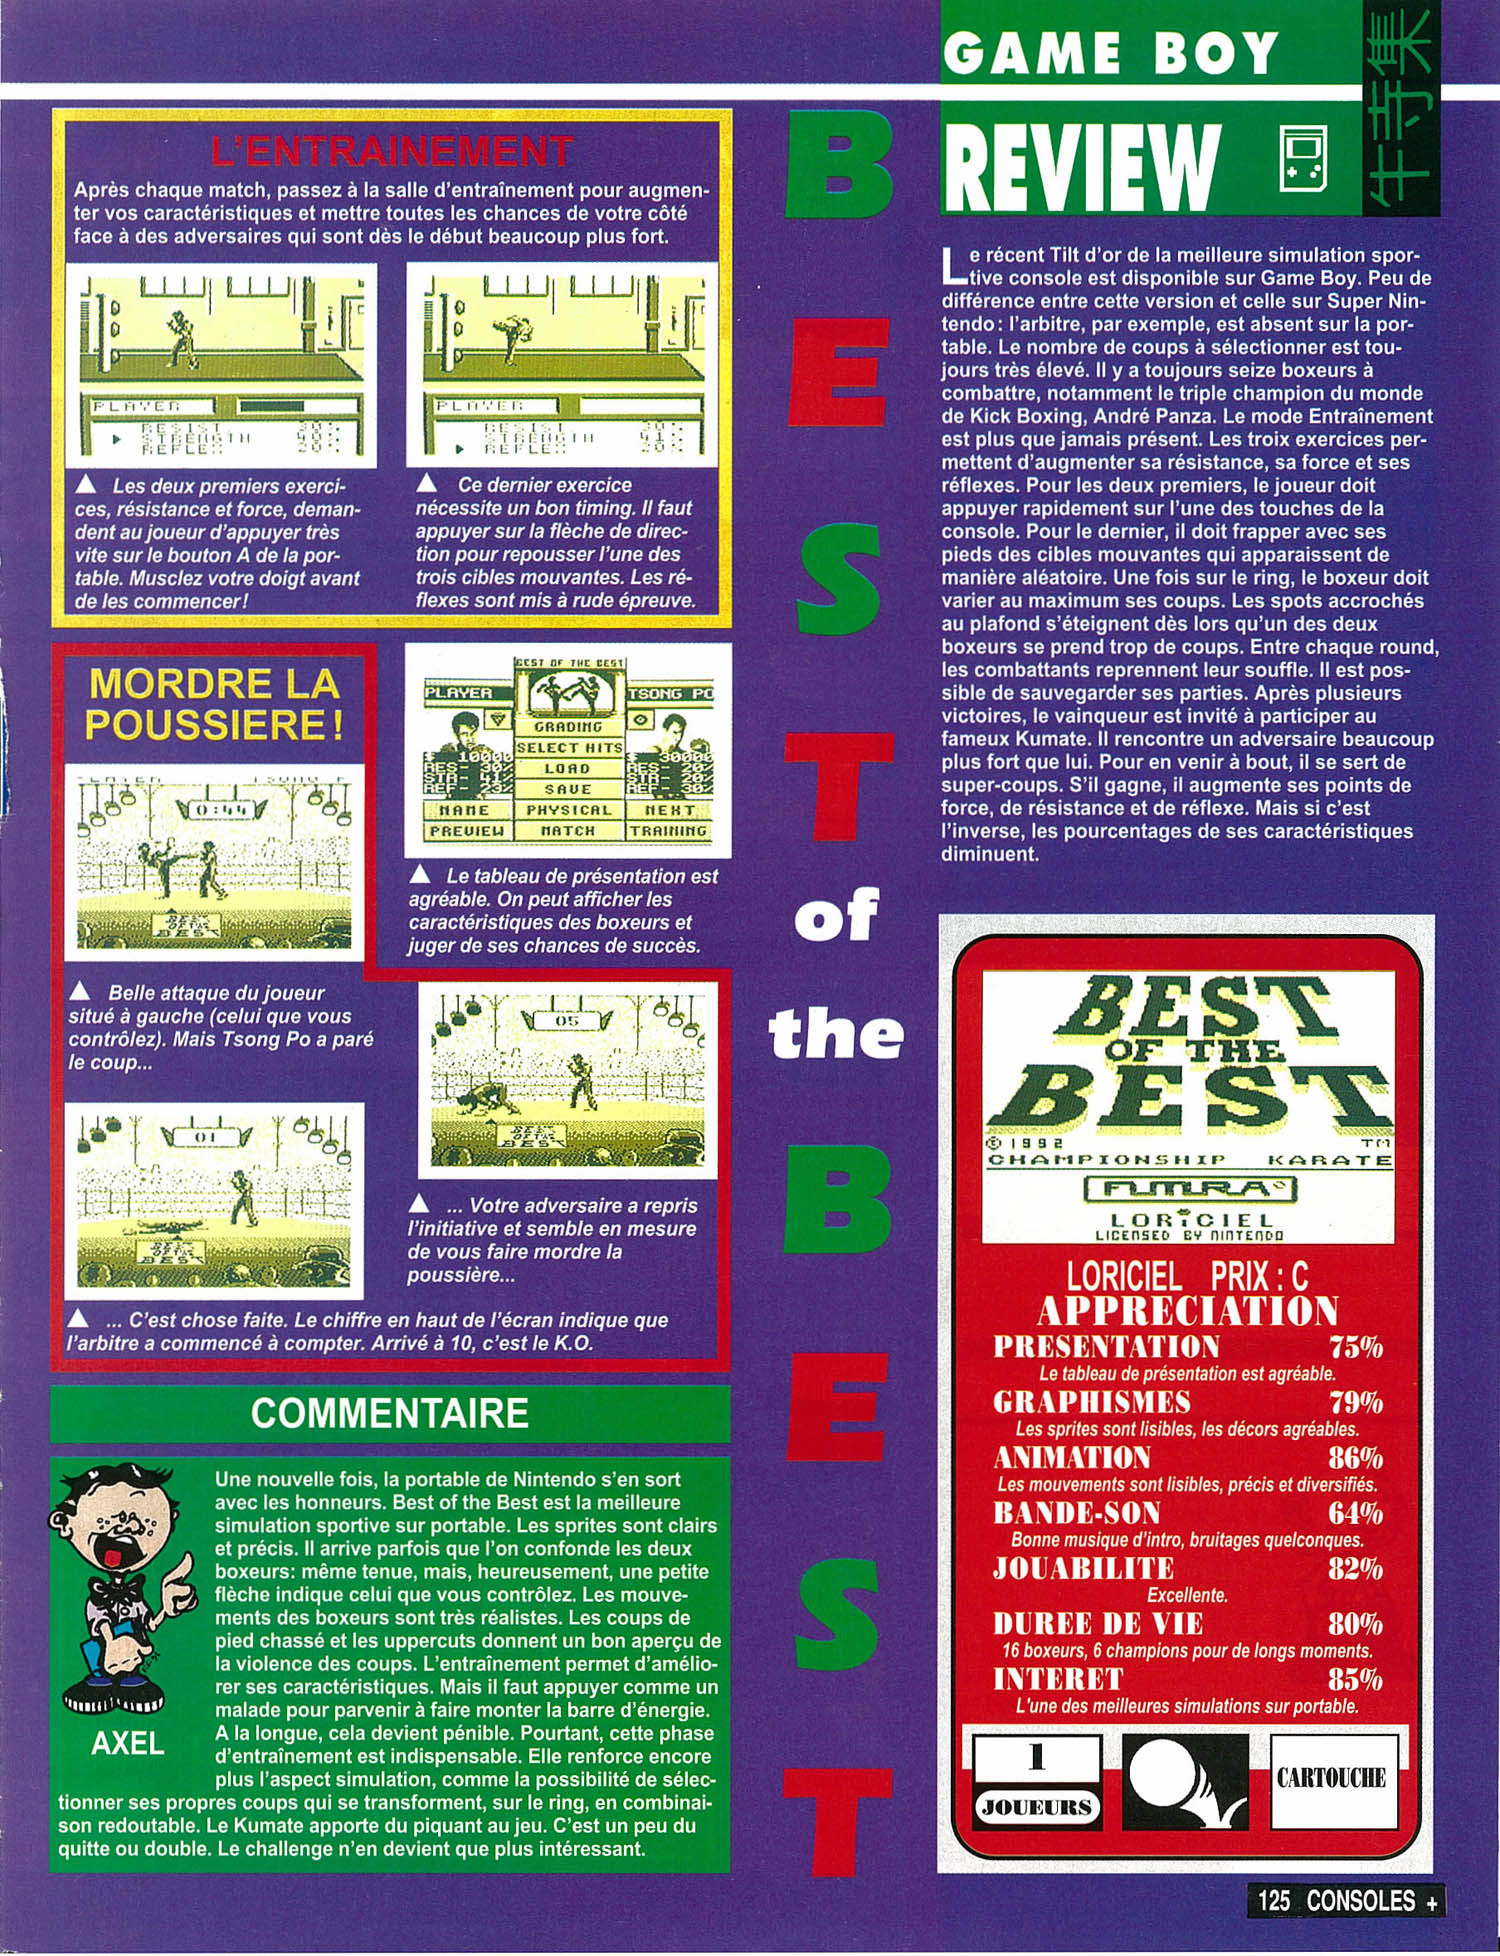 tests//1485/Consoles + 019 - Page 125 (avril 1993).jpg